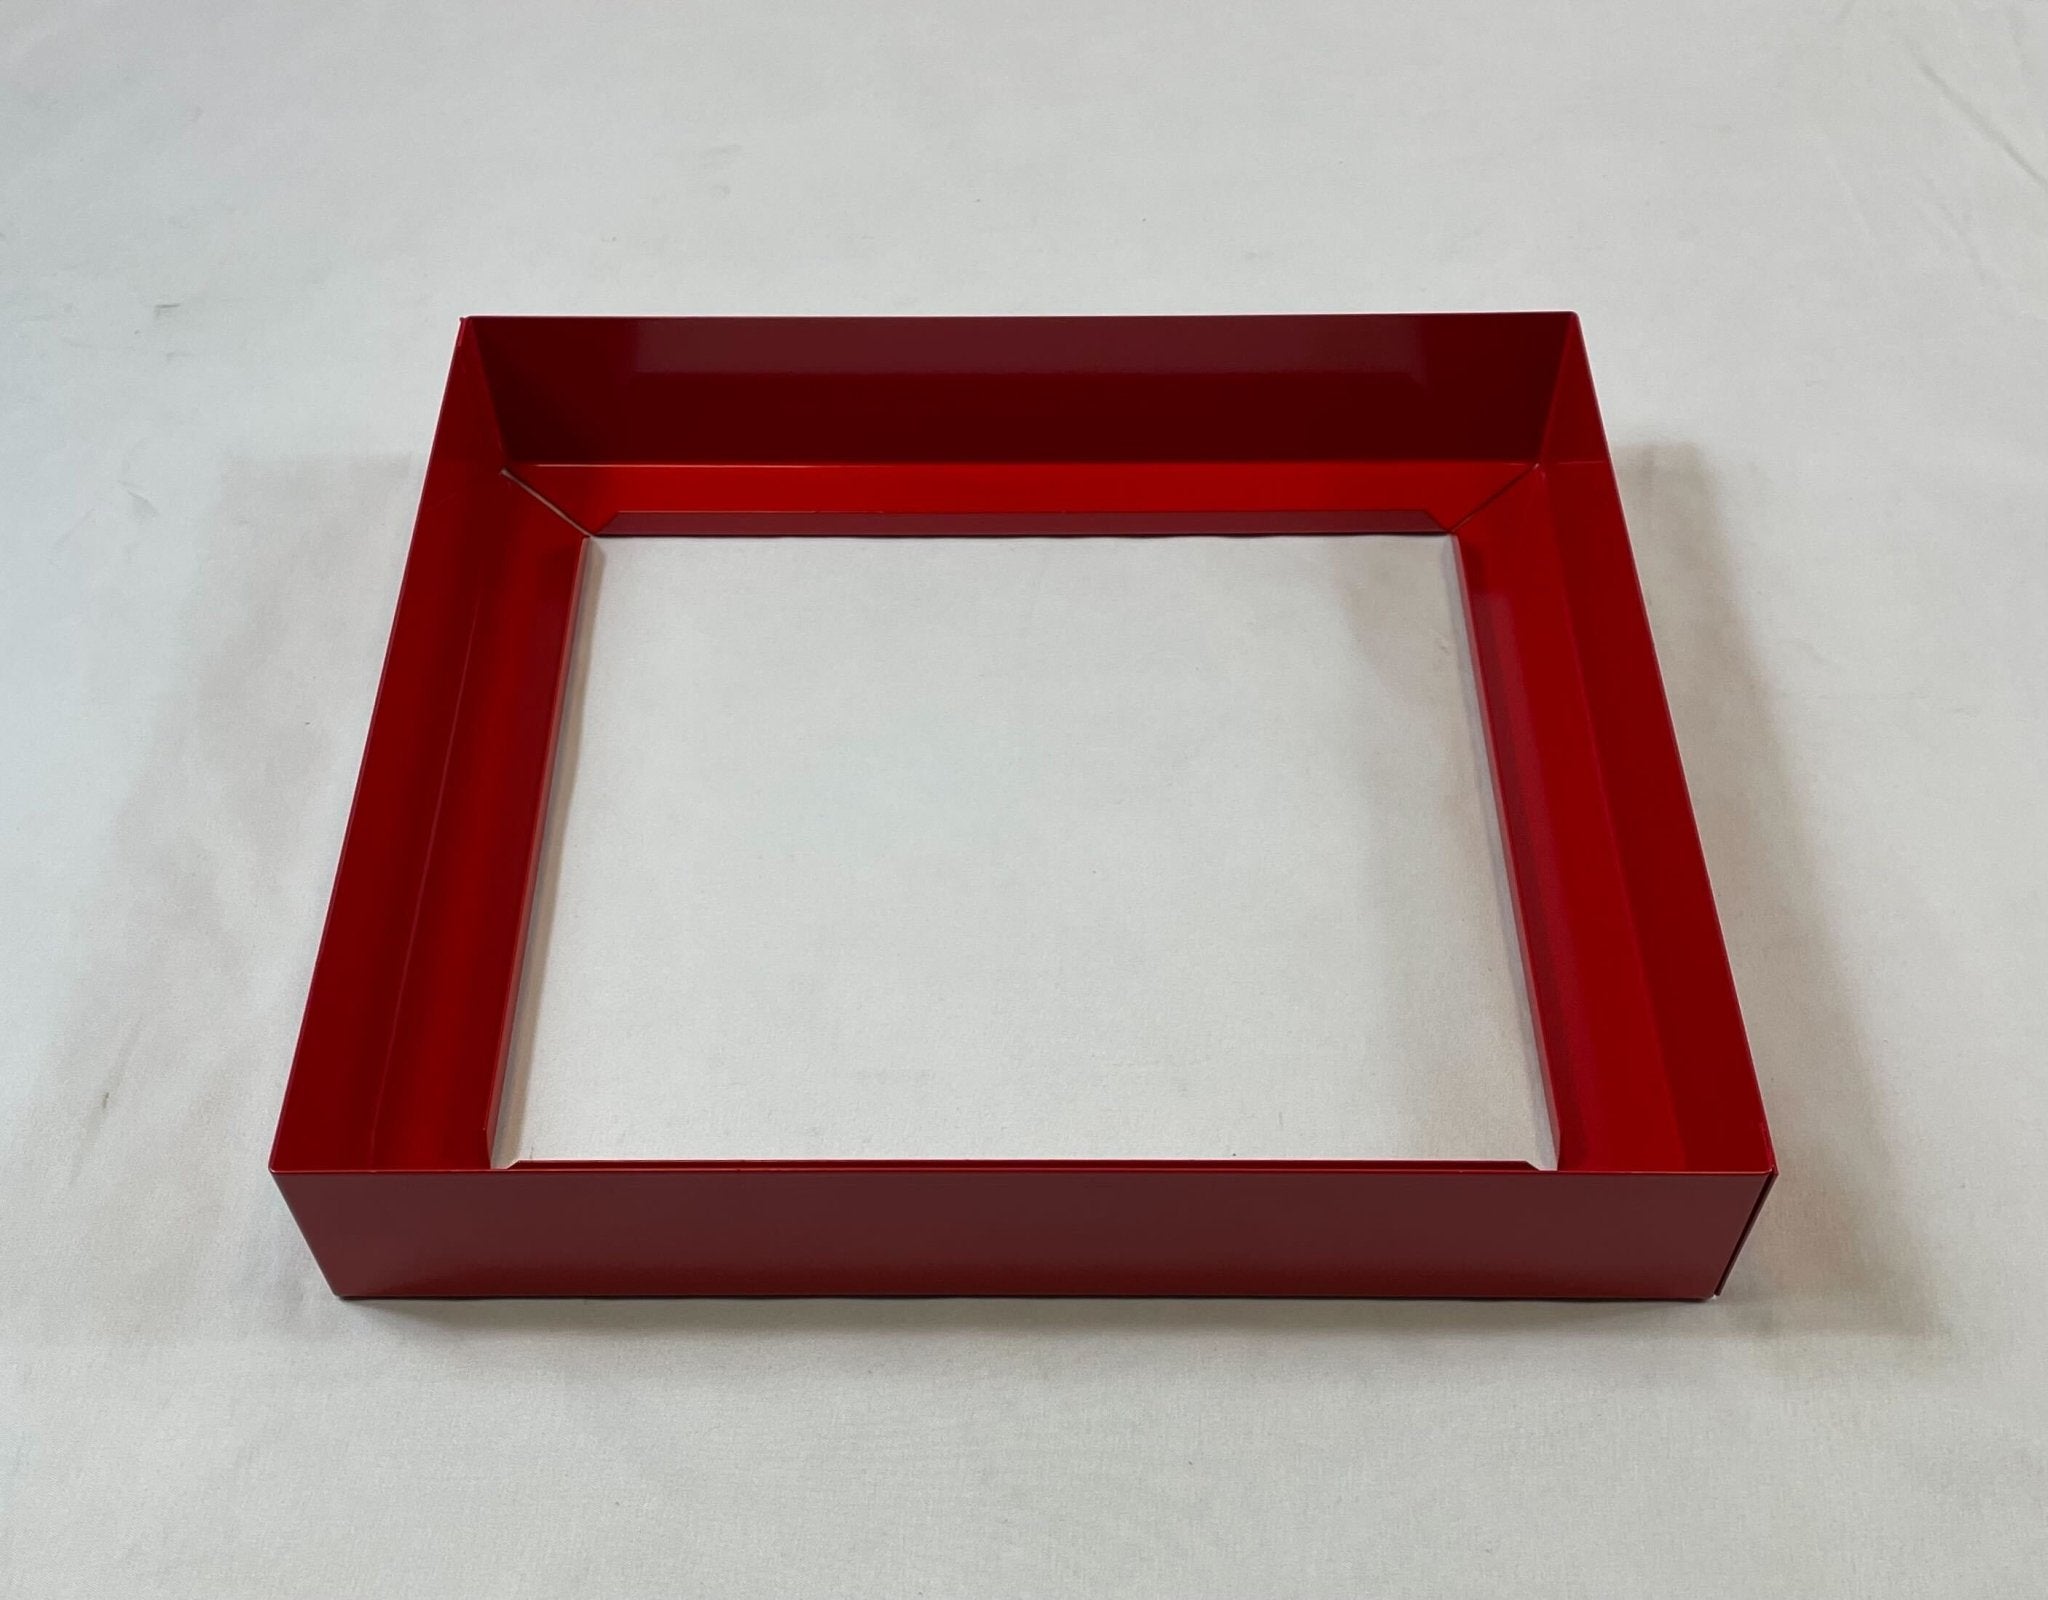 Silent Knight RA-100TR Trim Ring For 6860, Red - The Fire Alarm Supplier